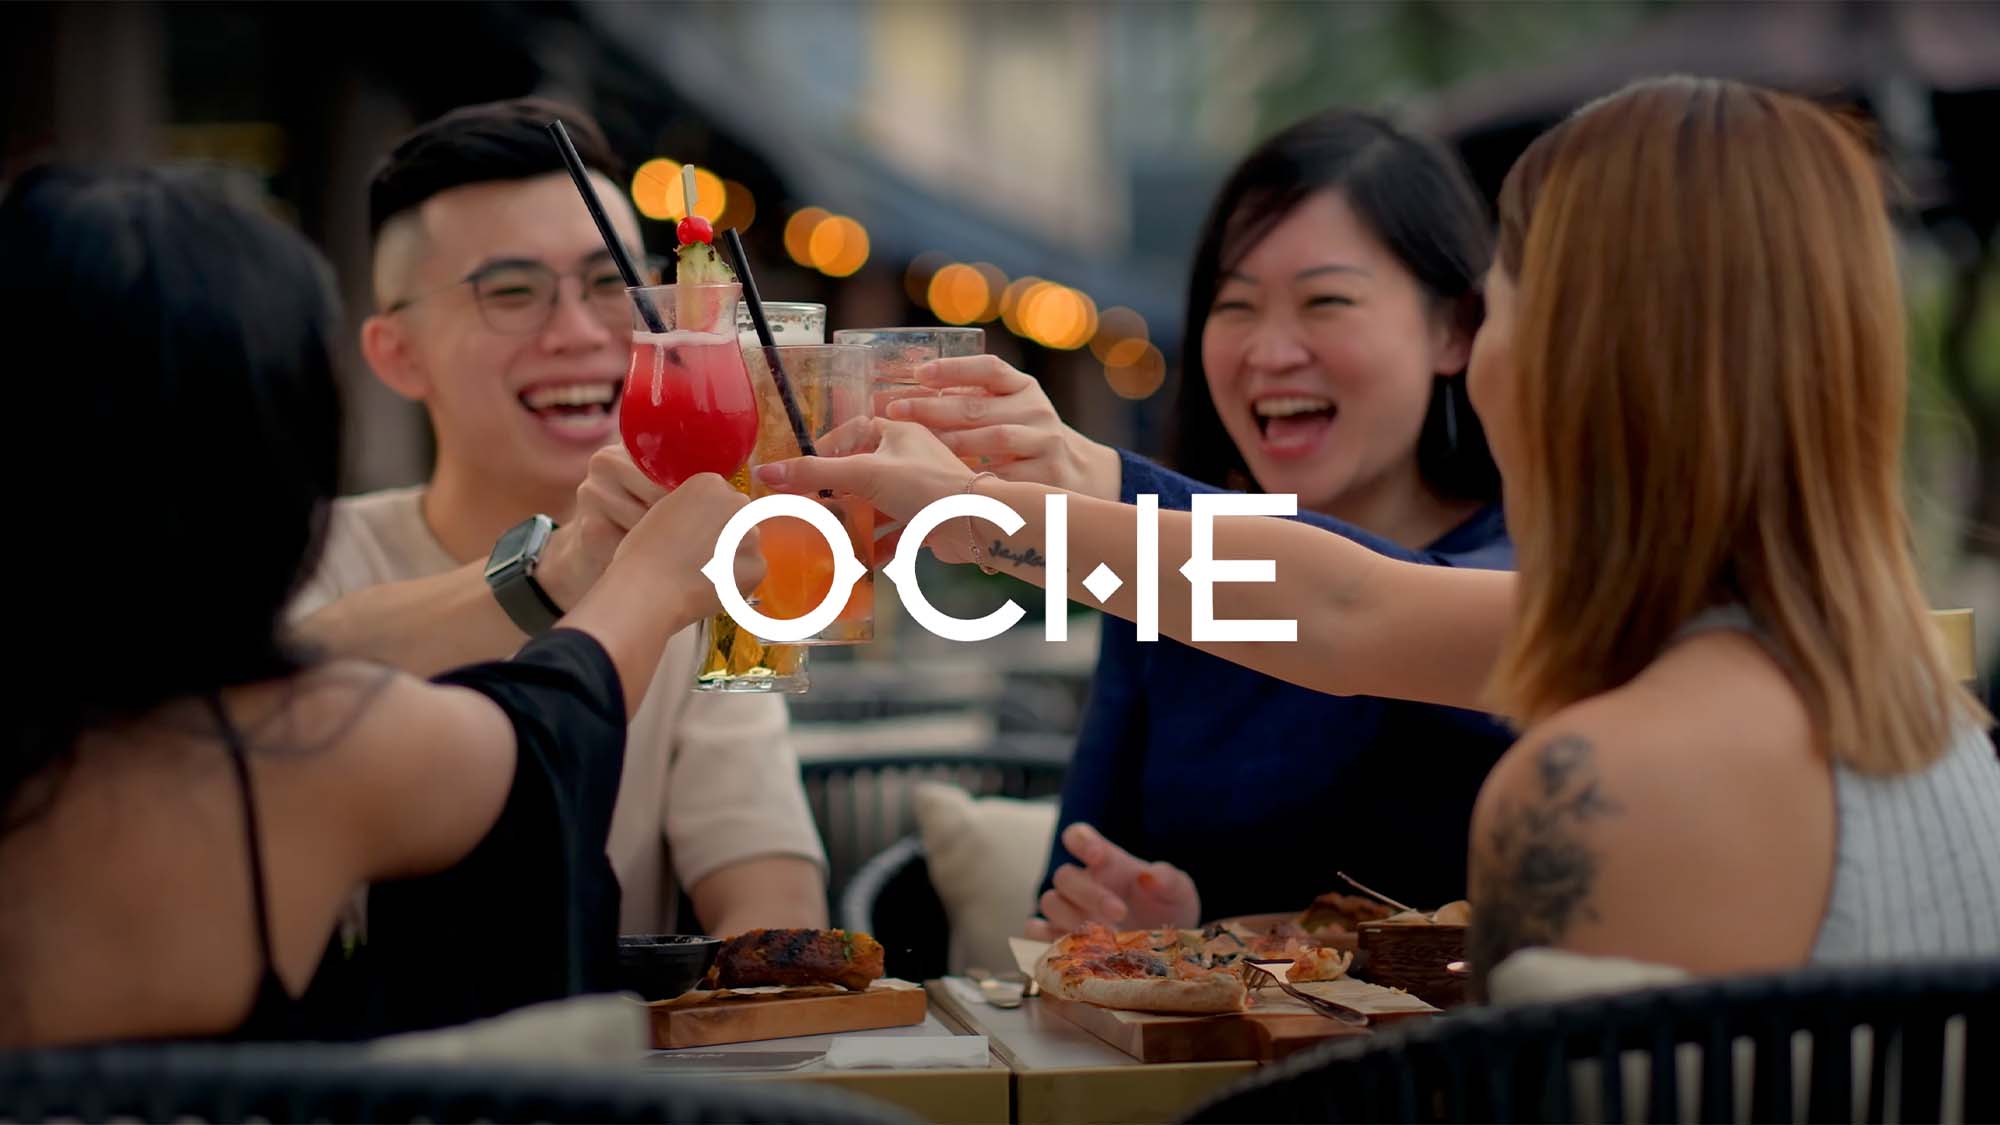 Oche video Drinks Restaurant in Singapore and Paris, made by COCO Creative Studio